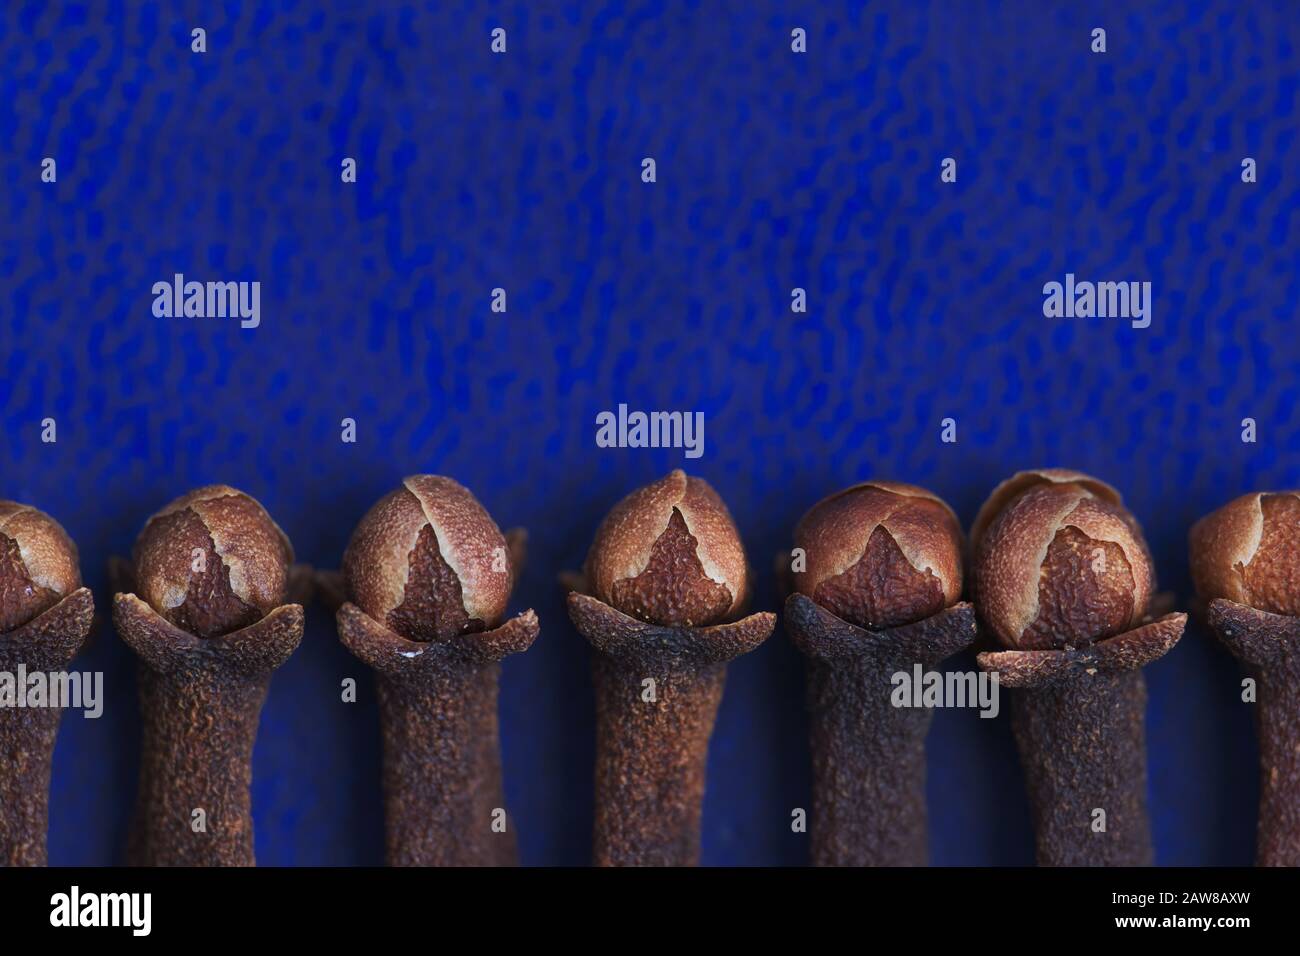 Macro photography of clove (Syzygium aromaticum) displayed in line on a blue background Stock Photo